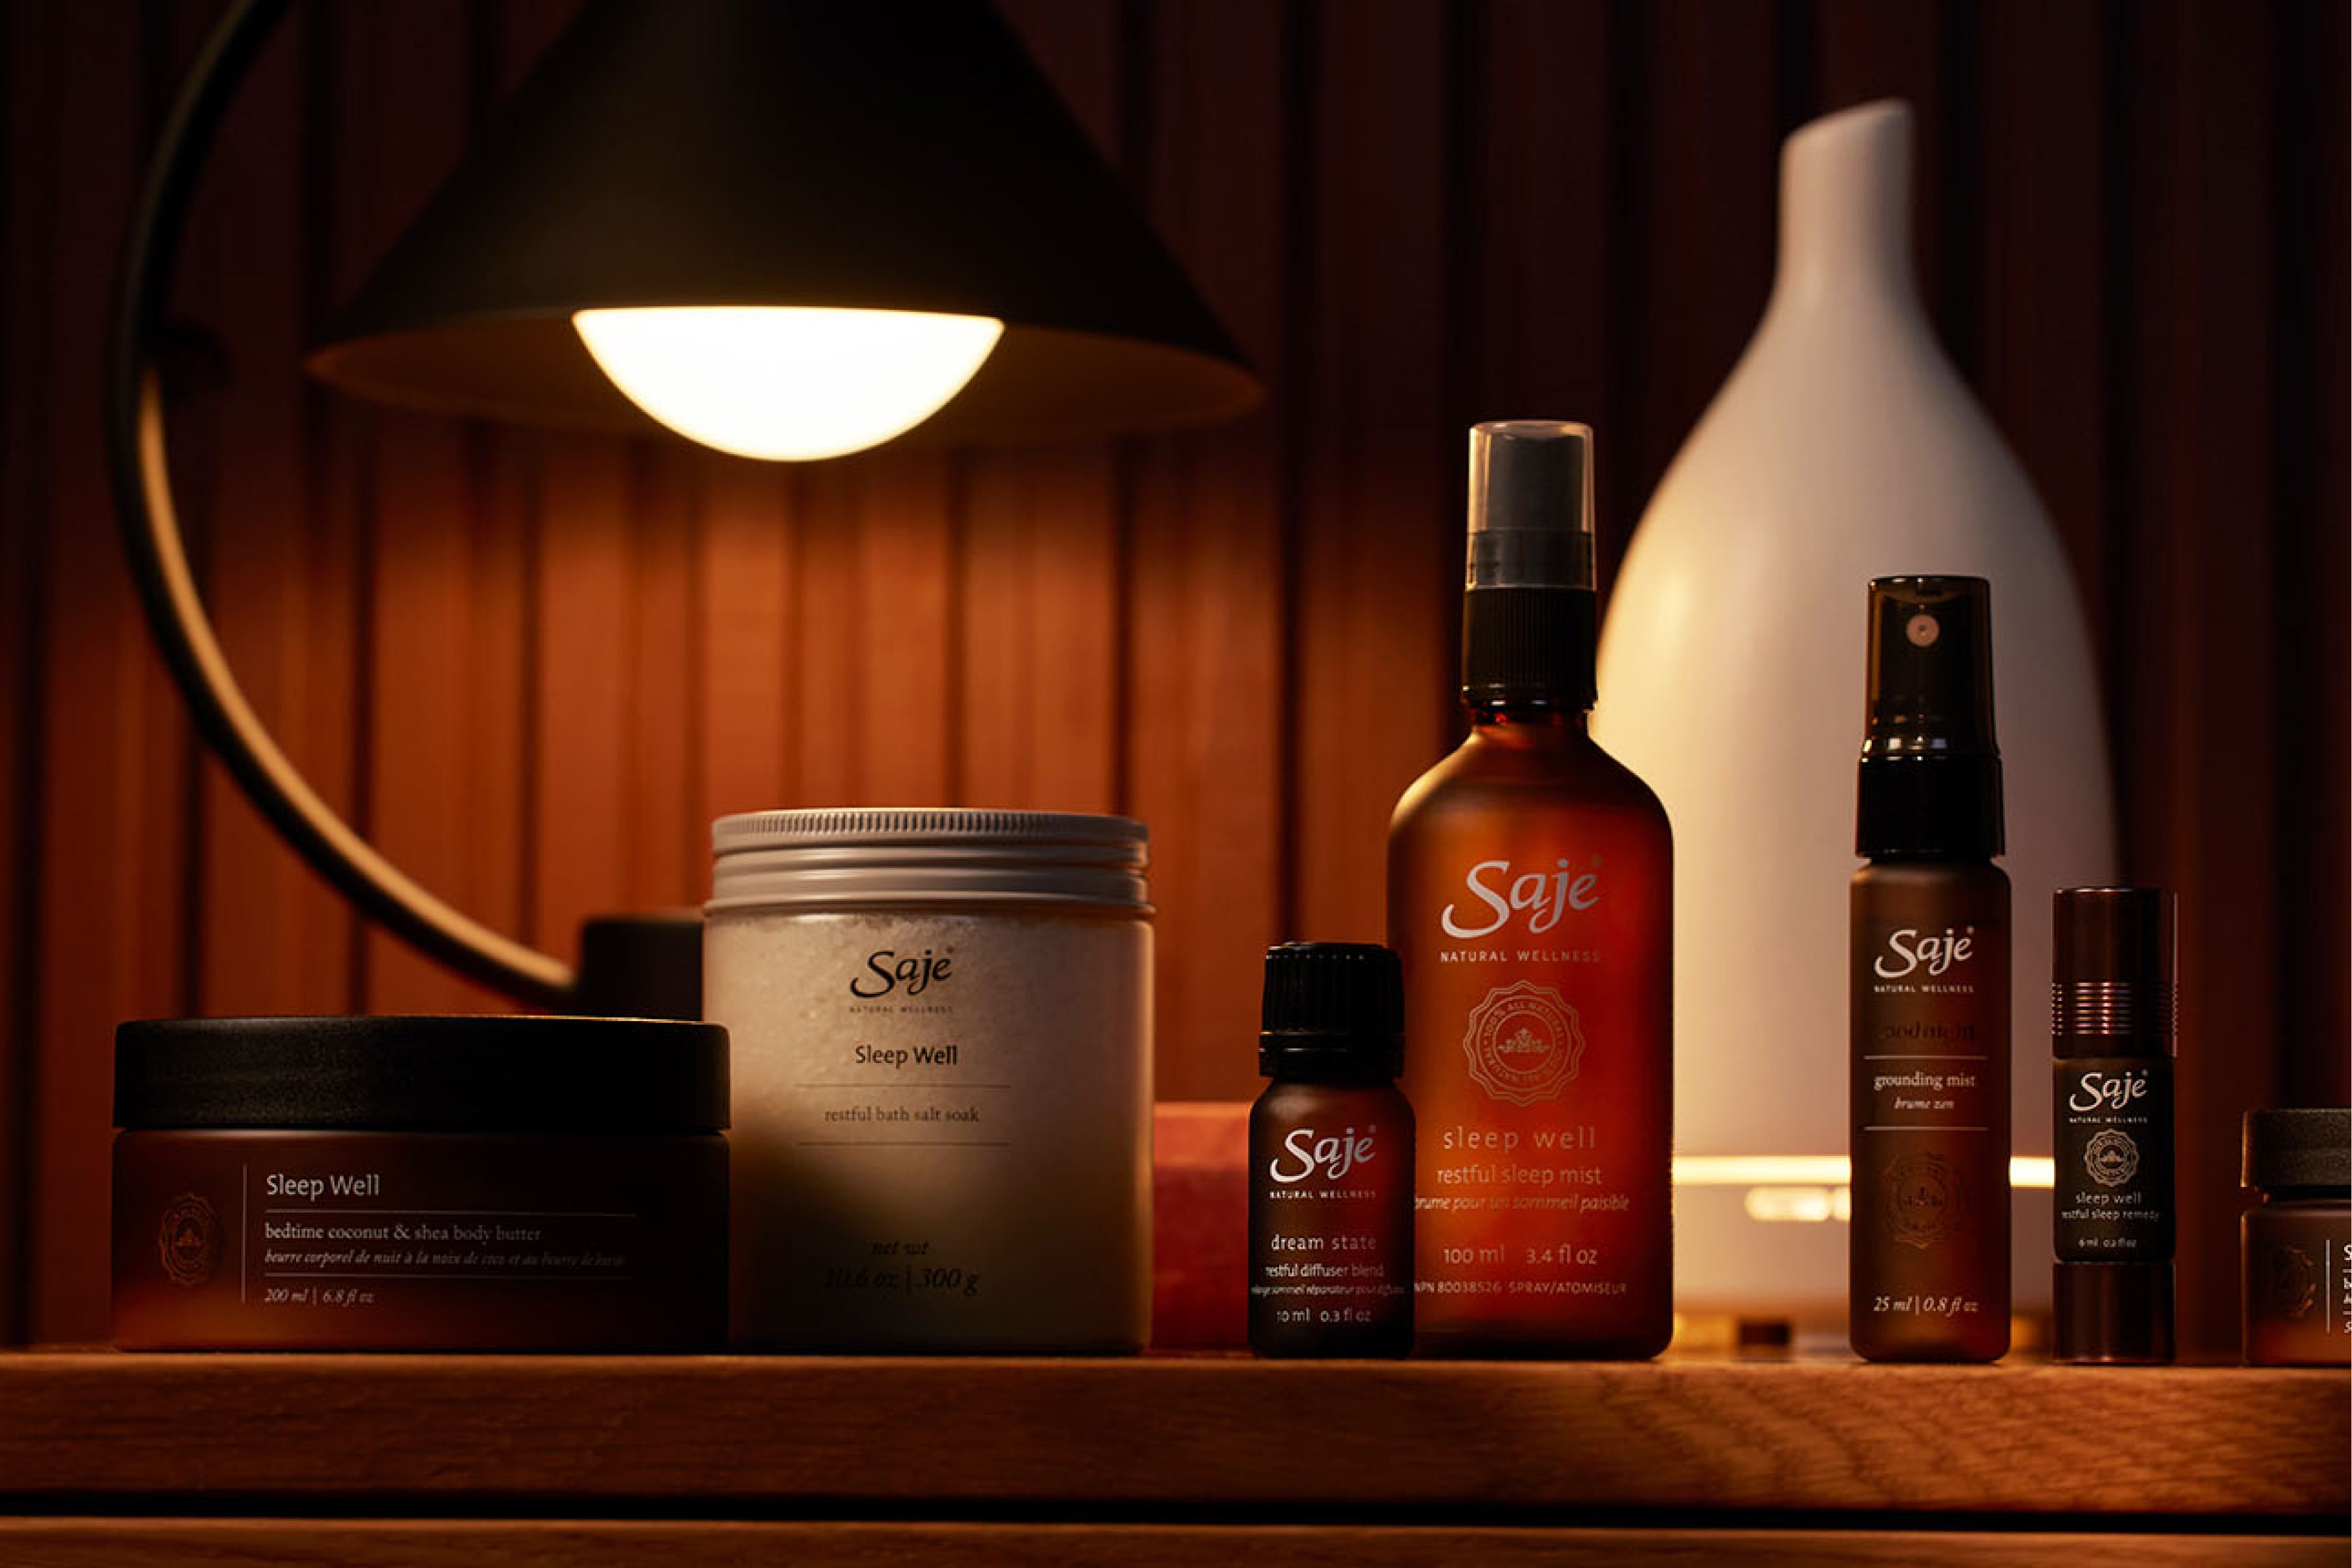 A collection of Saje sleep products on a wooden nightstand